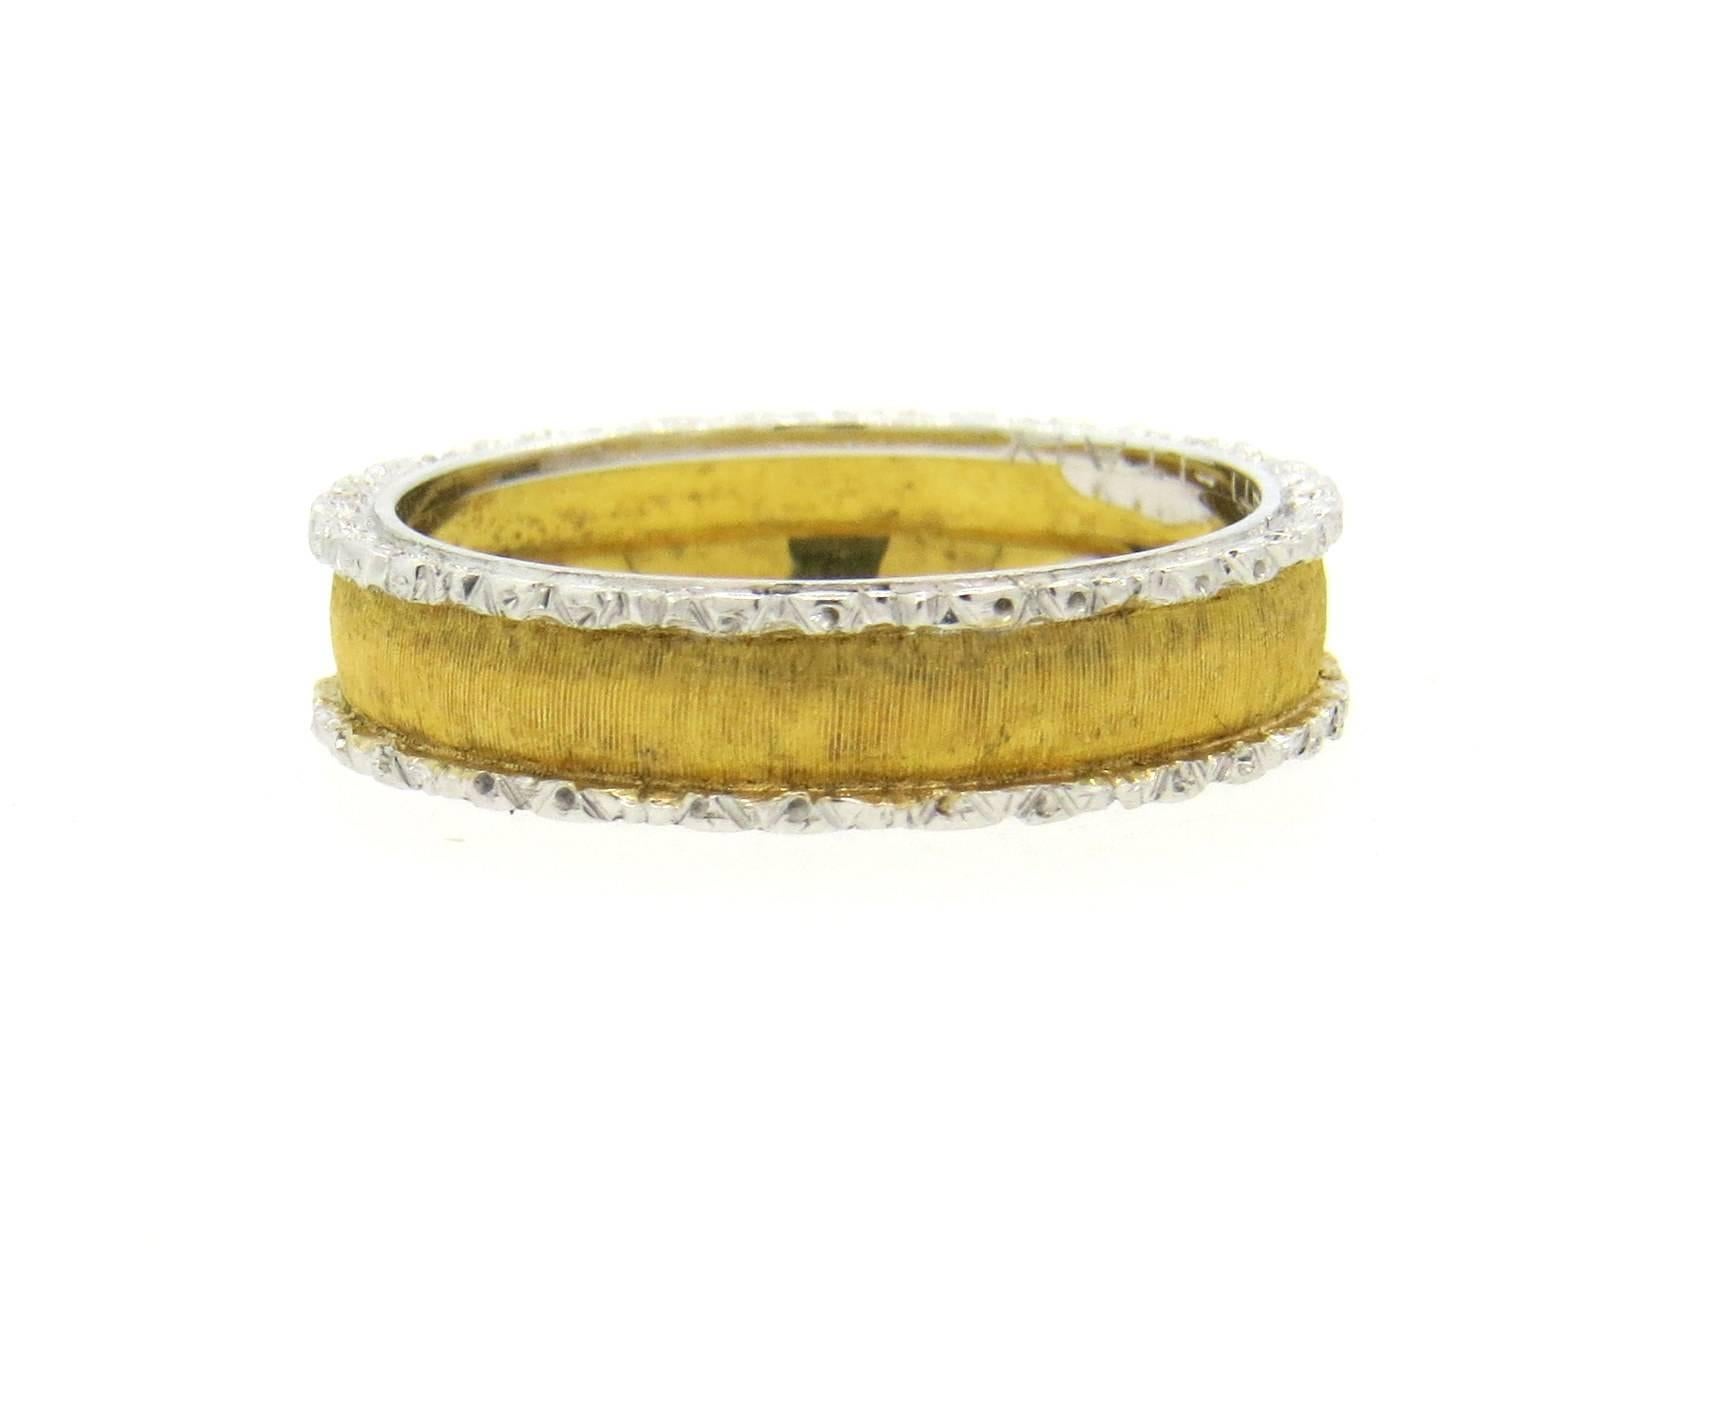 Classic 18k yellow and white gold wedding band ring, crafted by Buccellati. Ring is a size 7 and is 4.5mm wide. Marked: M.Buccellati, Italy, 750. Weight of the piece - 3.4 grams
